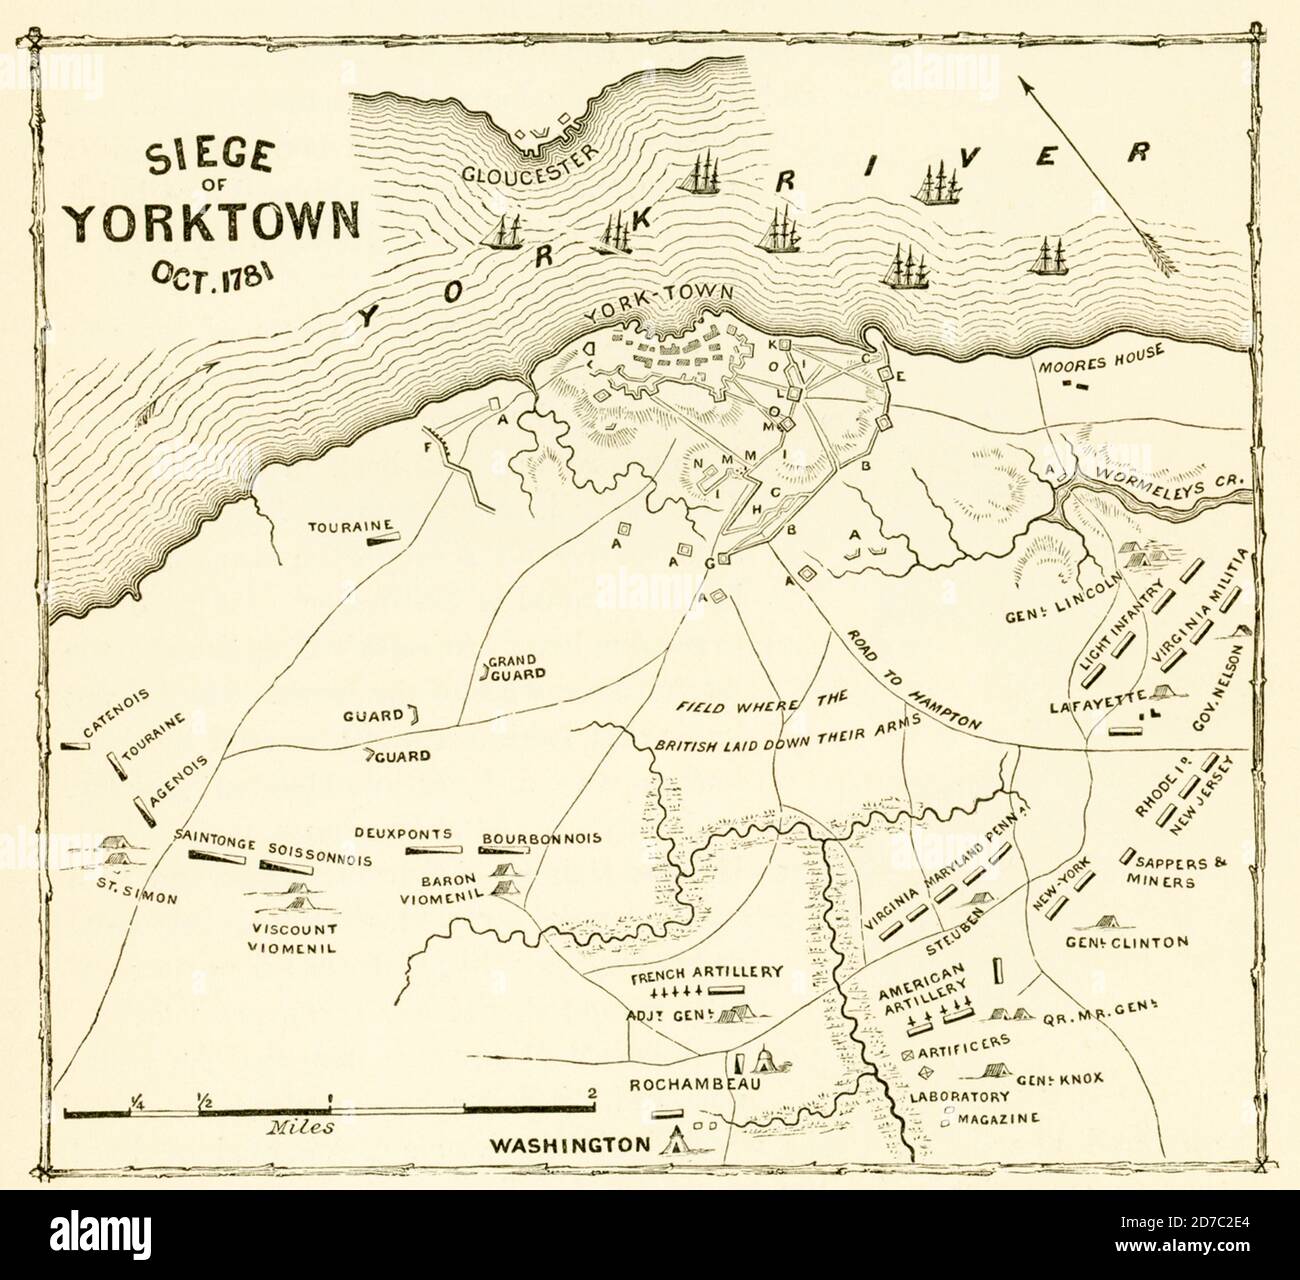 Siege of Yorktown Oct 1781. The Siege of Yorktown (also known as the Battle of Yorktown, the surrender at Yorktown, or the German Battle) ended on October 19, 1781, at Yorktown, Virginia. It was a decisive victory by a combined force of American Continental Army troops led by General George Washington and French Army troops led by the Comte de Rochambeau over a British army commanded by British peer and Lieutenant General Charles Cornwallis. Stock Photo